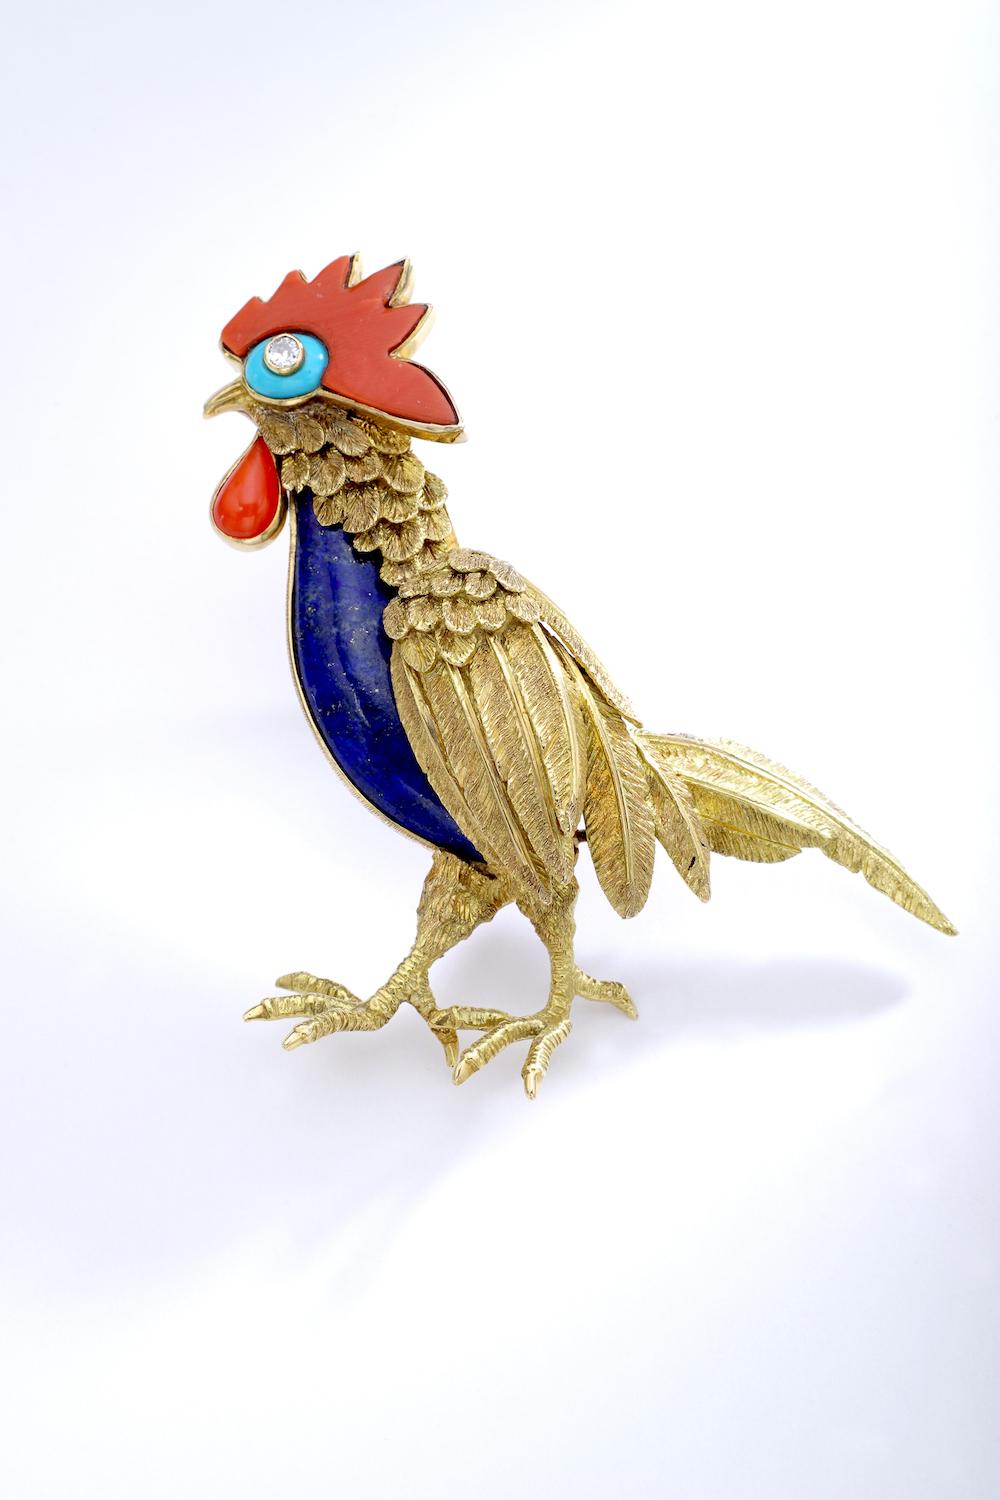 Jean Claude Champagnat realised many pieces for Christian Dior in the 1960.
Significant Diamond Lapis Lazuli Turquoise Gold Rooster Brooch.
French marks and maker's mark.
Signed Jce for Jean Claude Champagnat.

Gross weight: 26.83 grams.